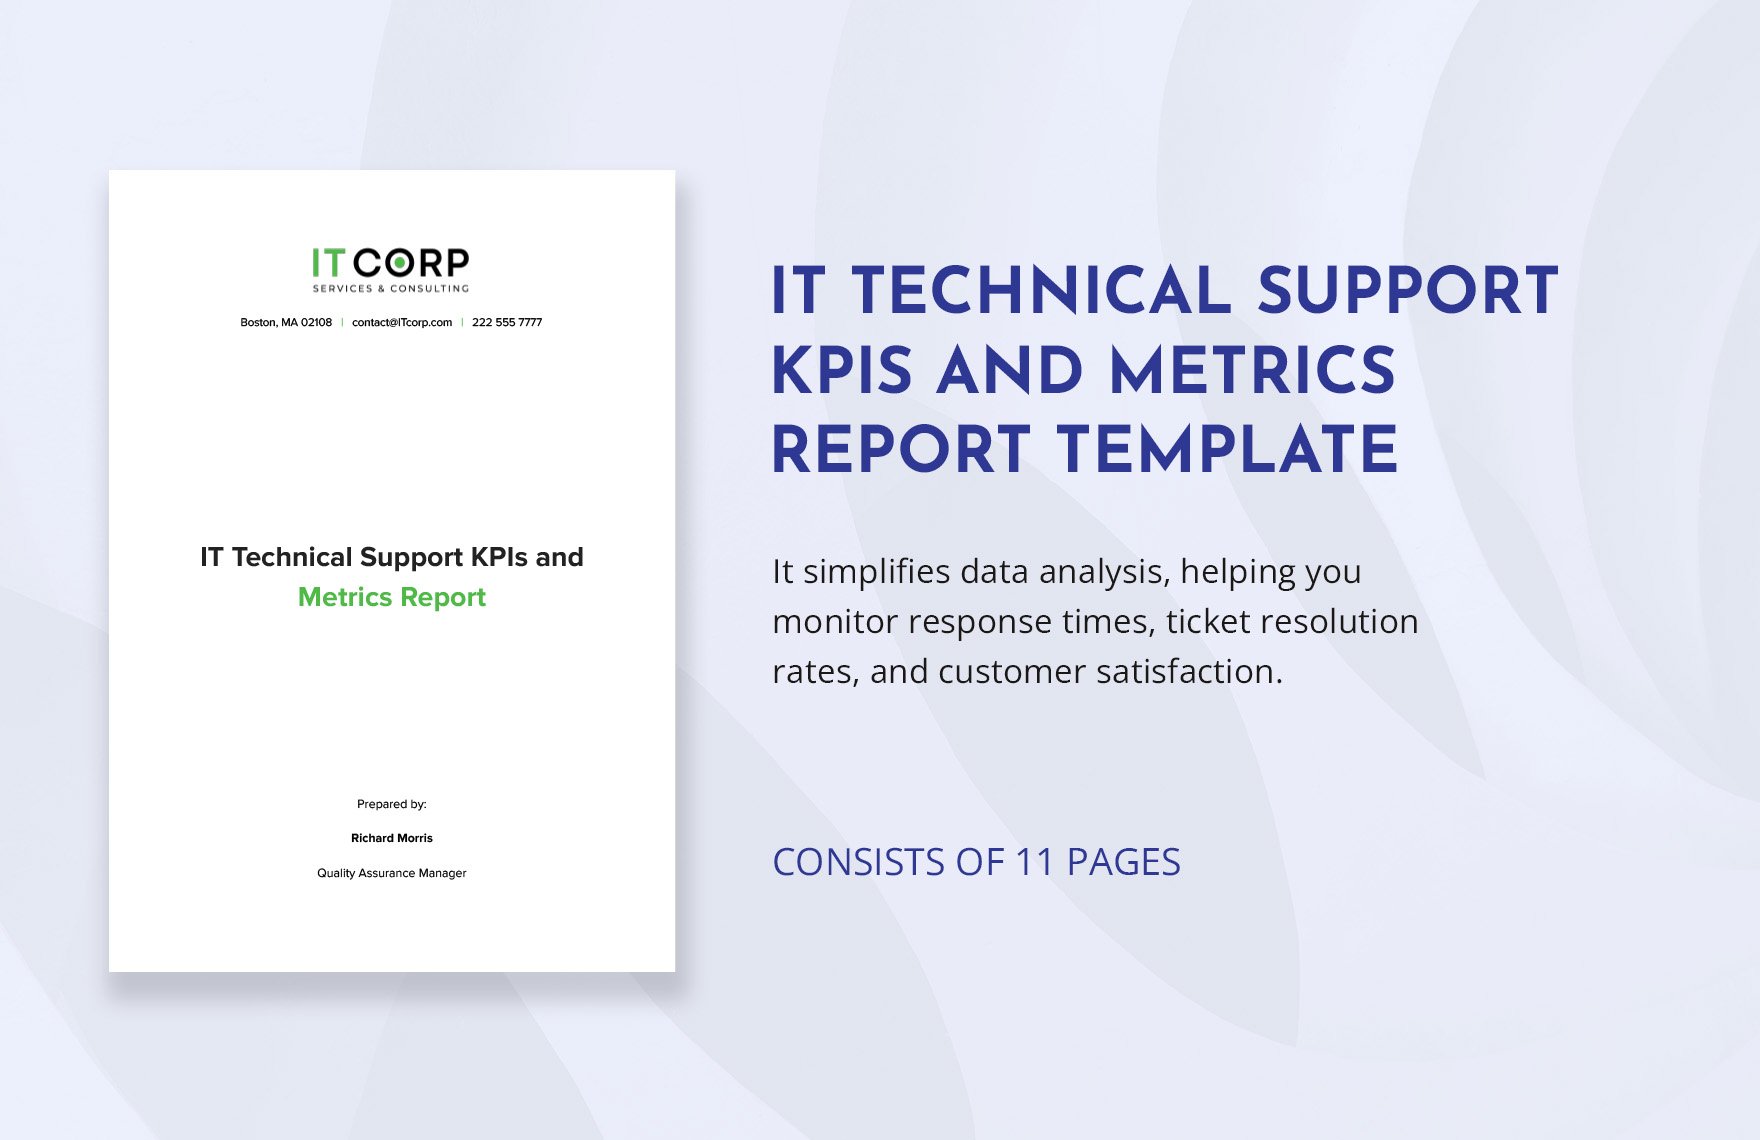 IT Technical Support KPIs and Metrics Report Template